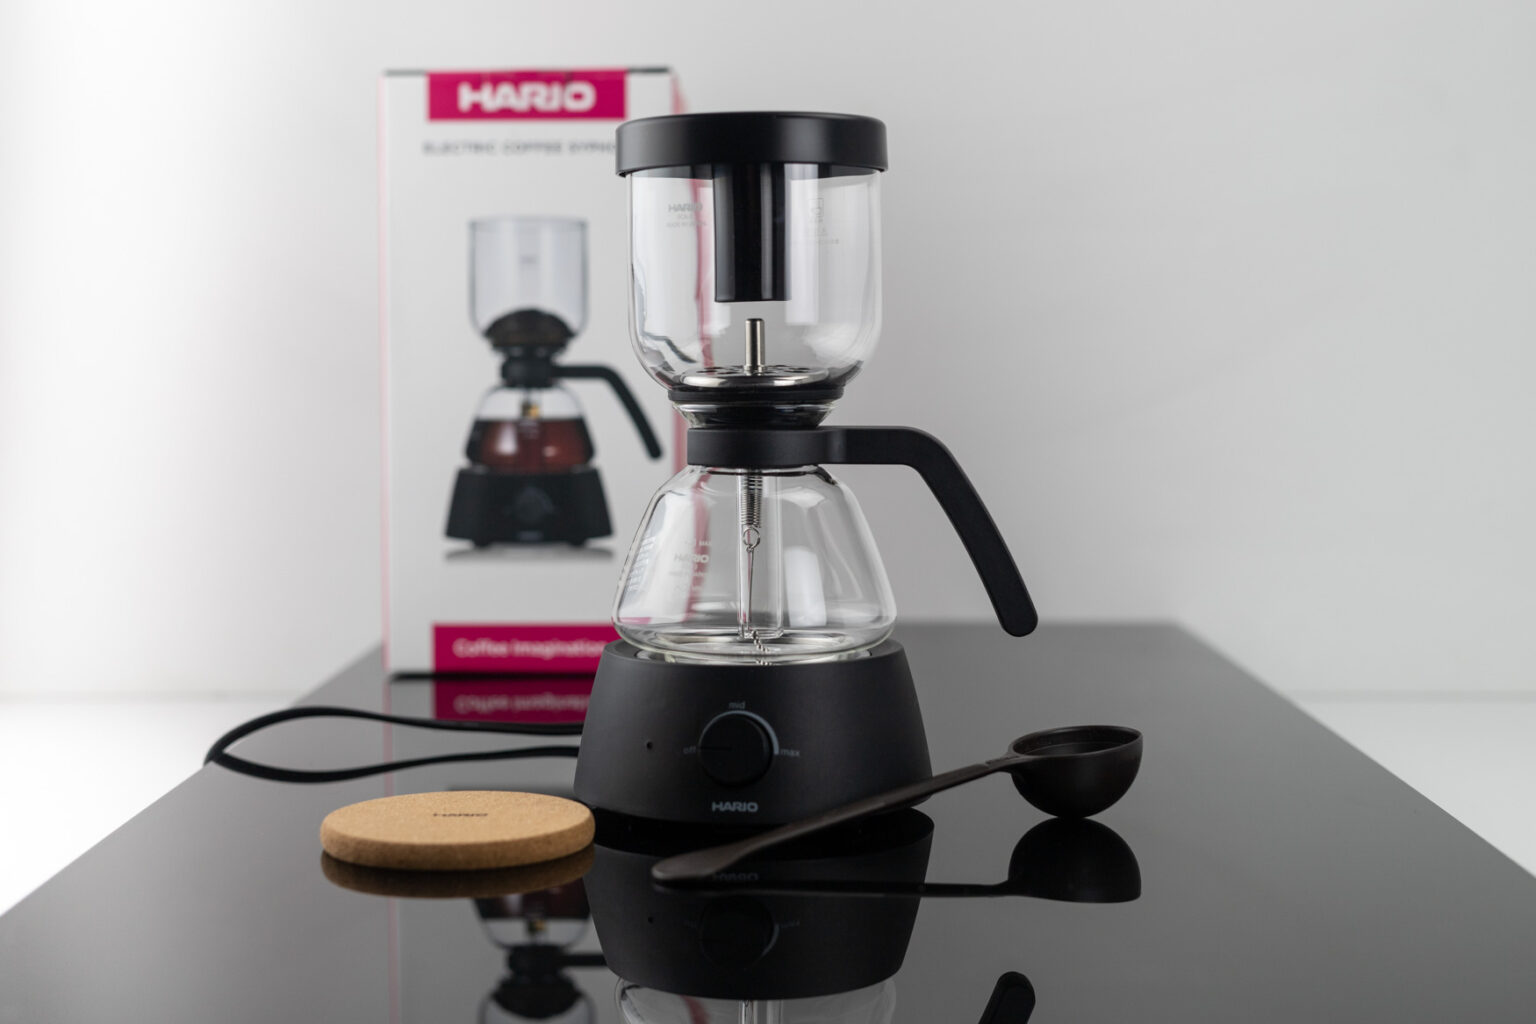 The Hario Electric Coffee Siphon, set up and ready for use.